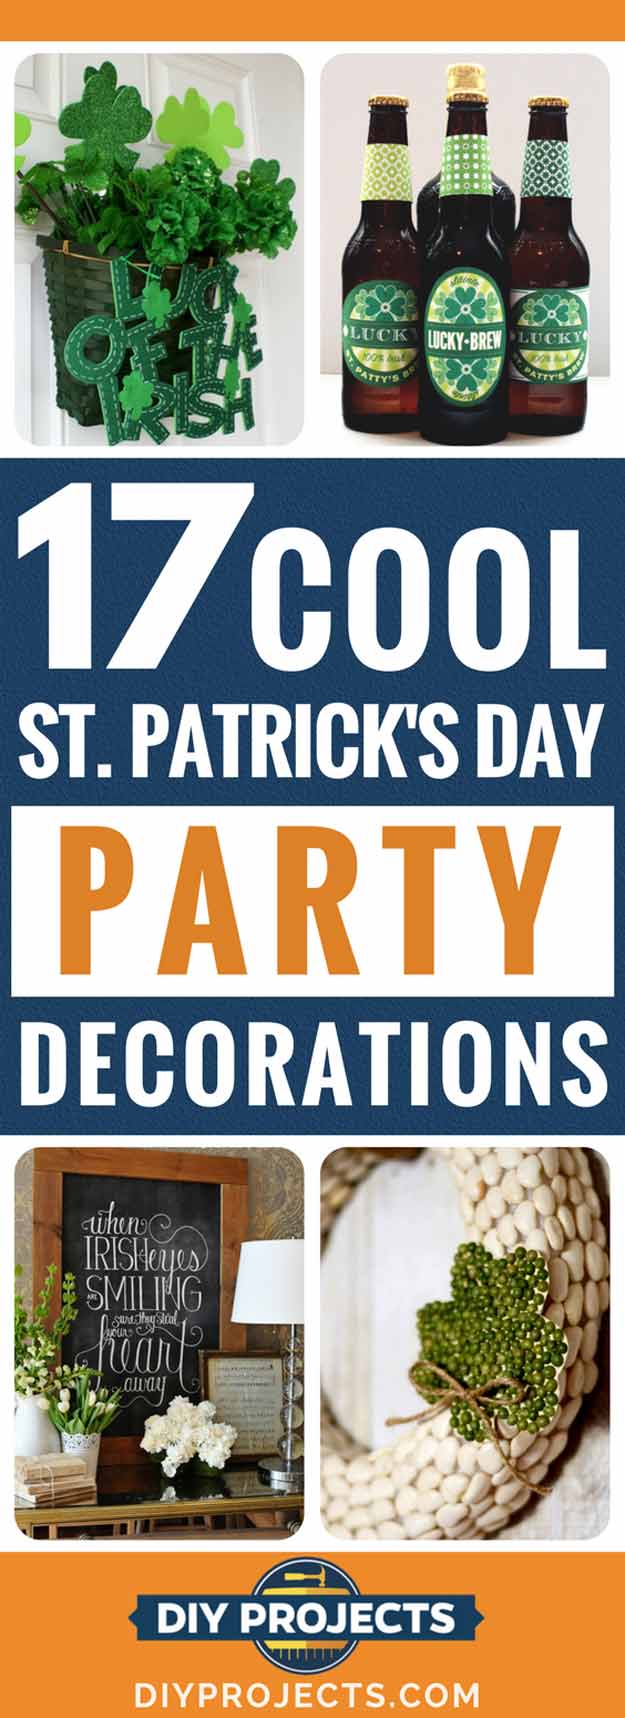 17 Cool St. Patrick's Day Party Decorations | DIY Projects